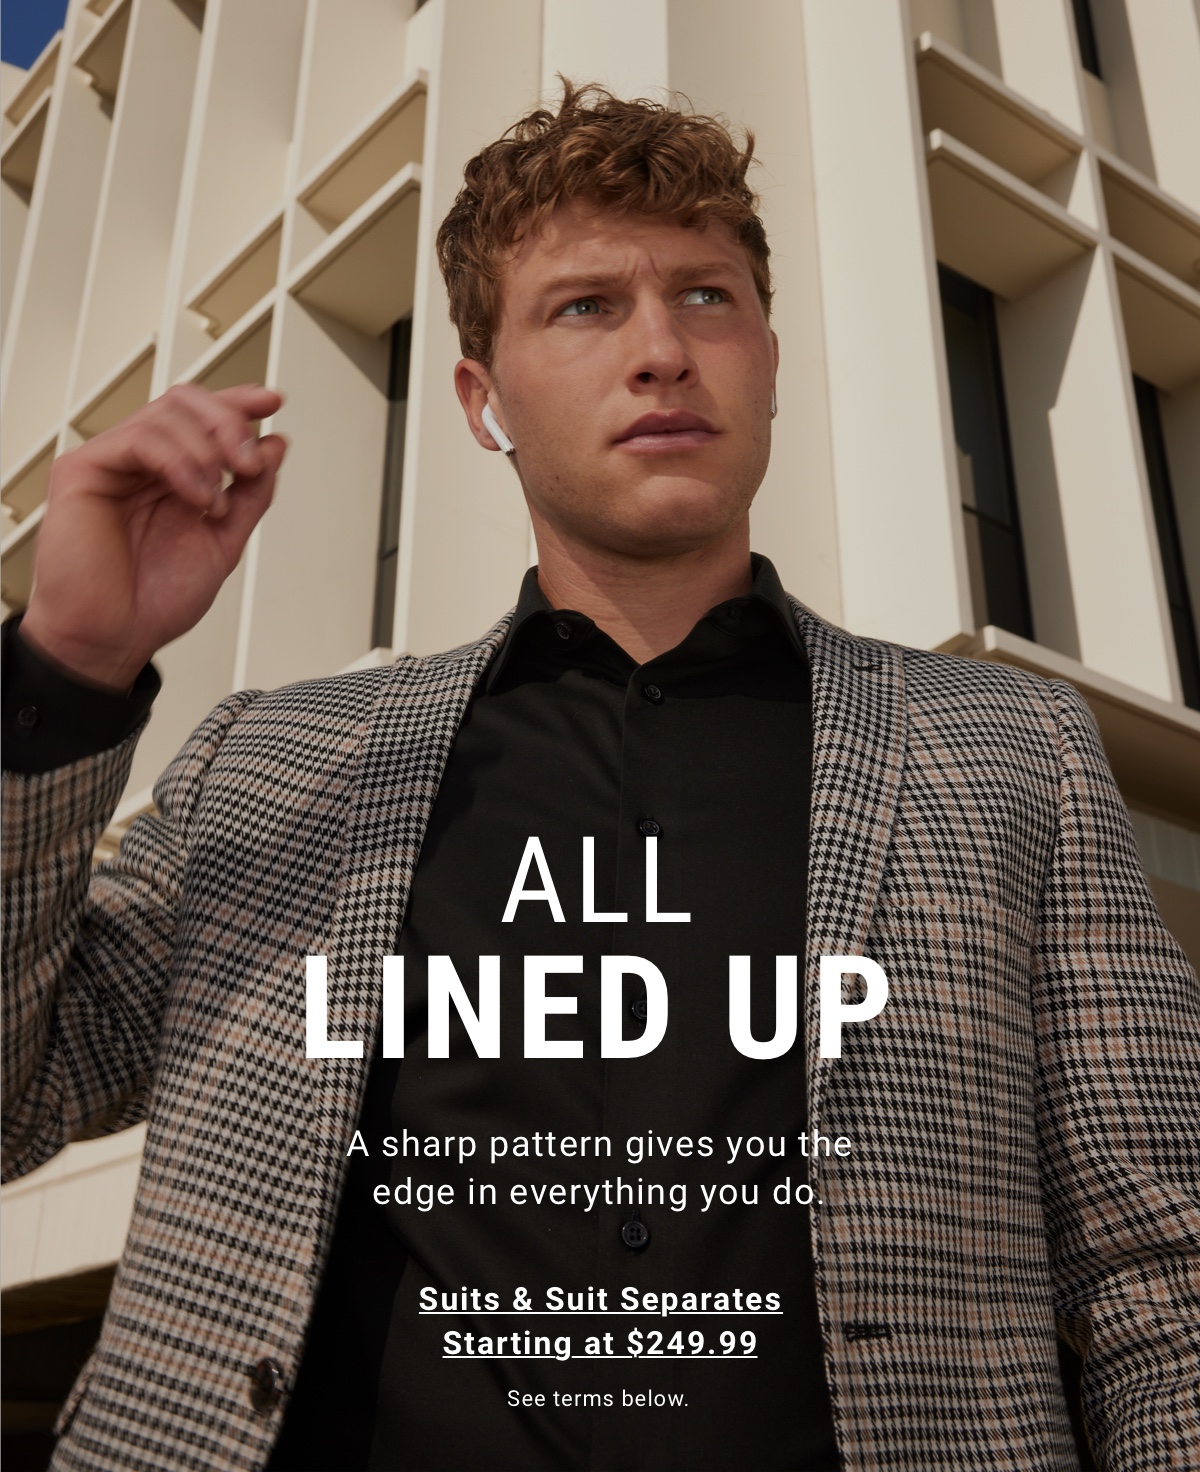 ALL LINED UP | Suits and Suit Separates starting at $249.99